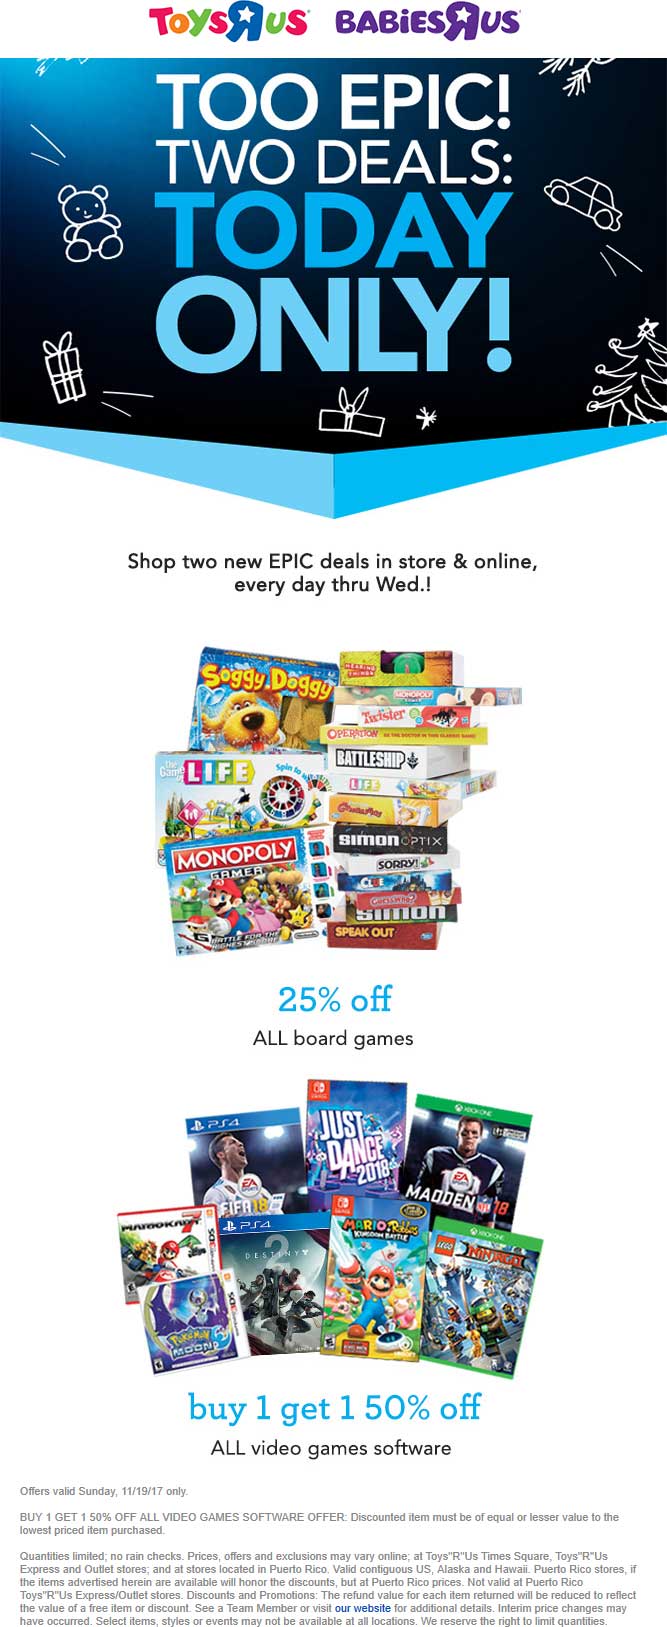 Toys R Us Coupon April 2024 Second video game 50% off today + 25% off all board games at Toys R Us, ditto online